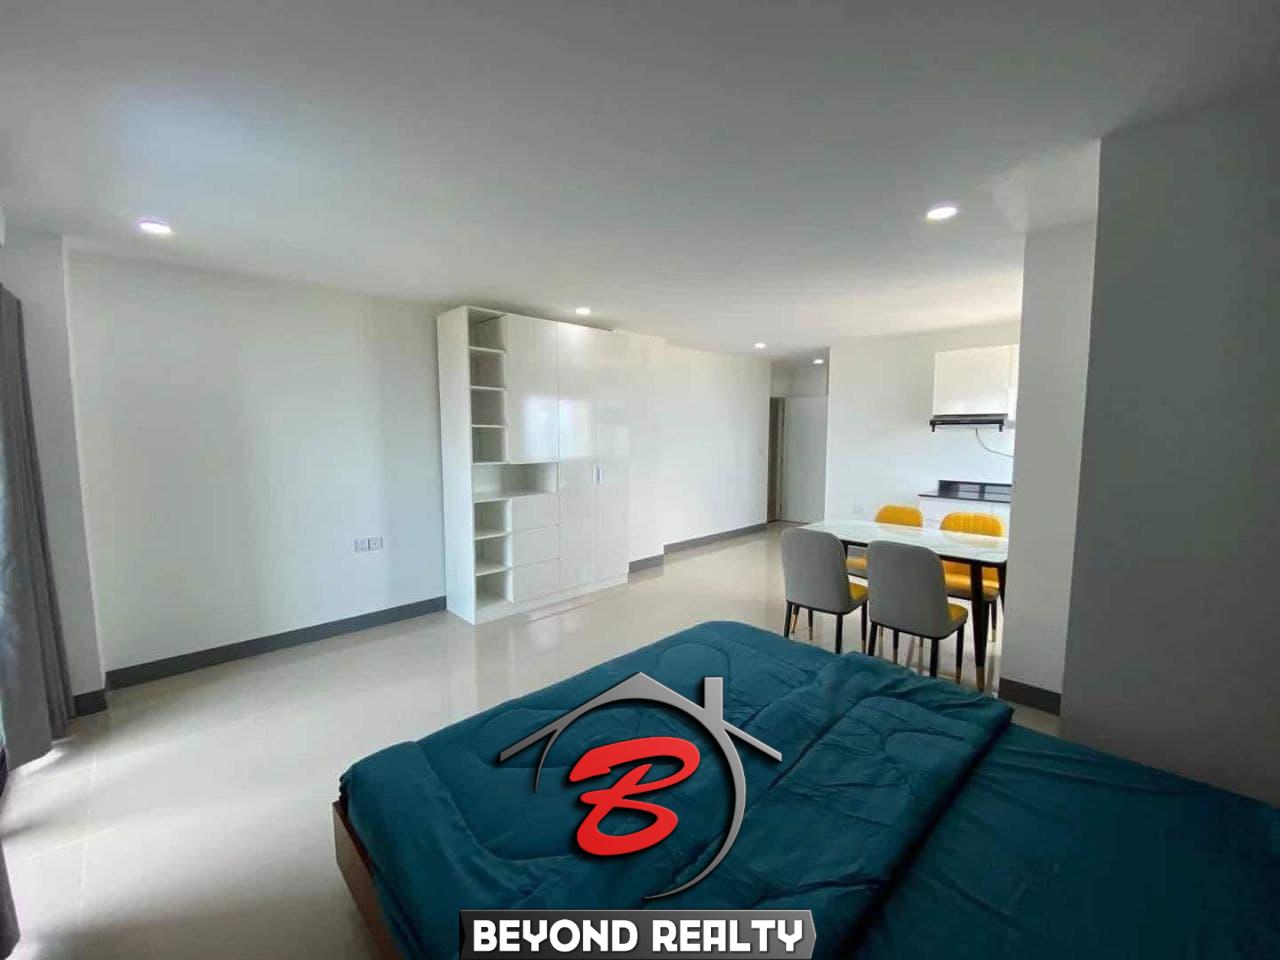 serviced apartment for rent in Sihanoukville Cambodia